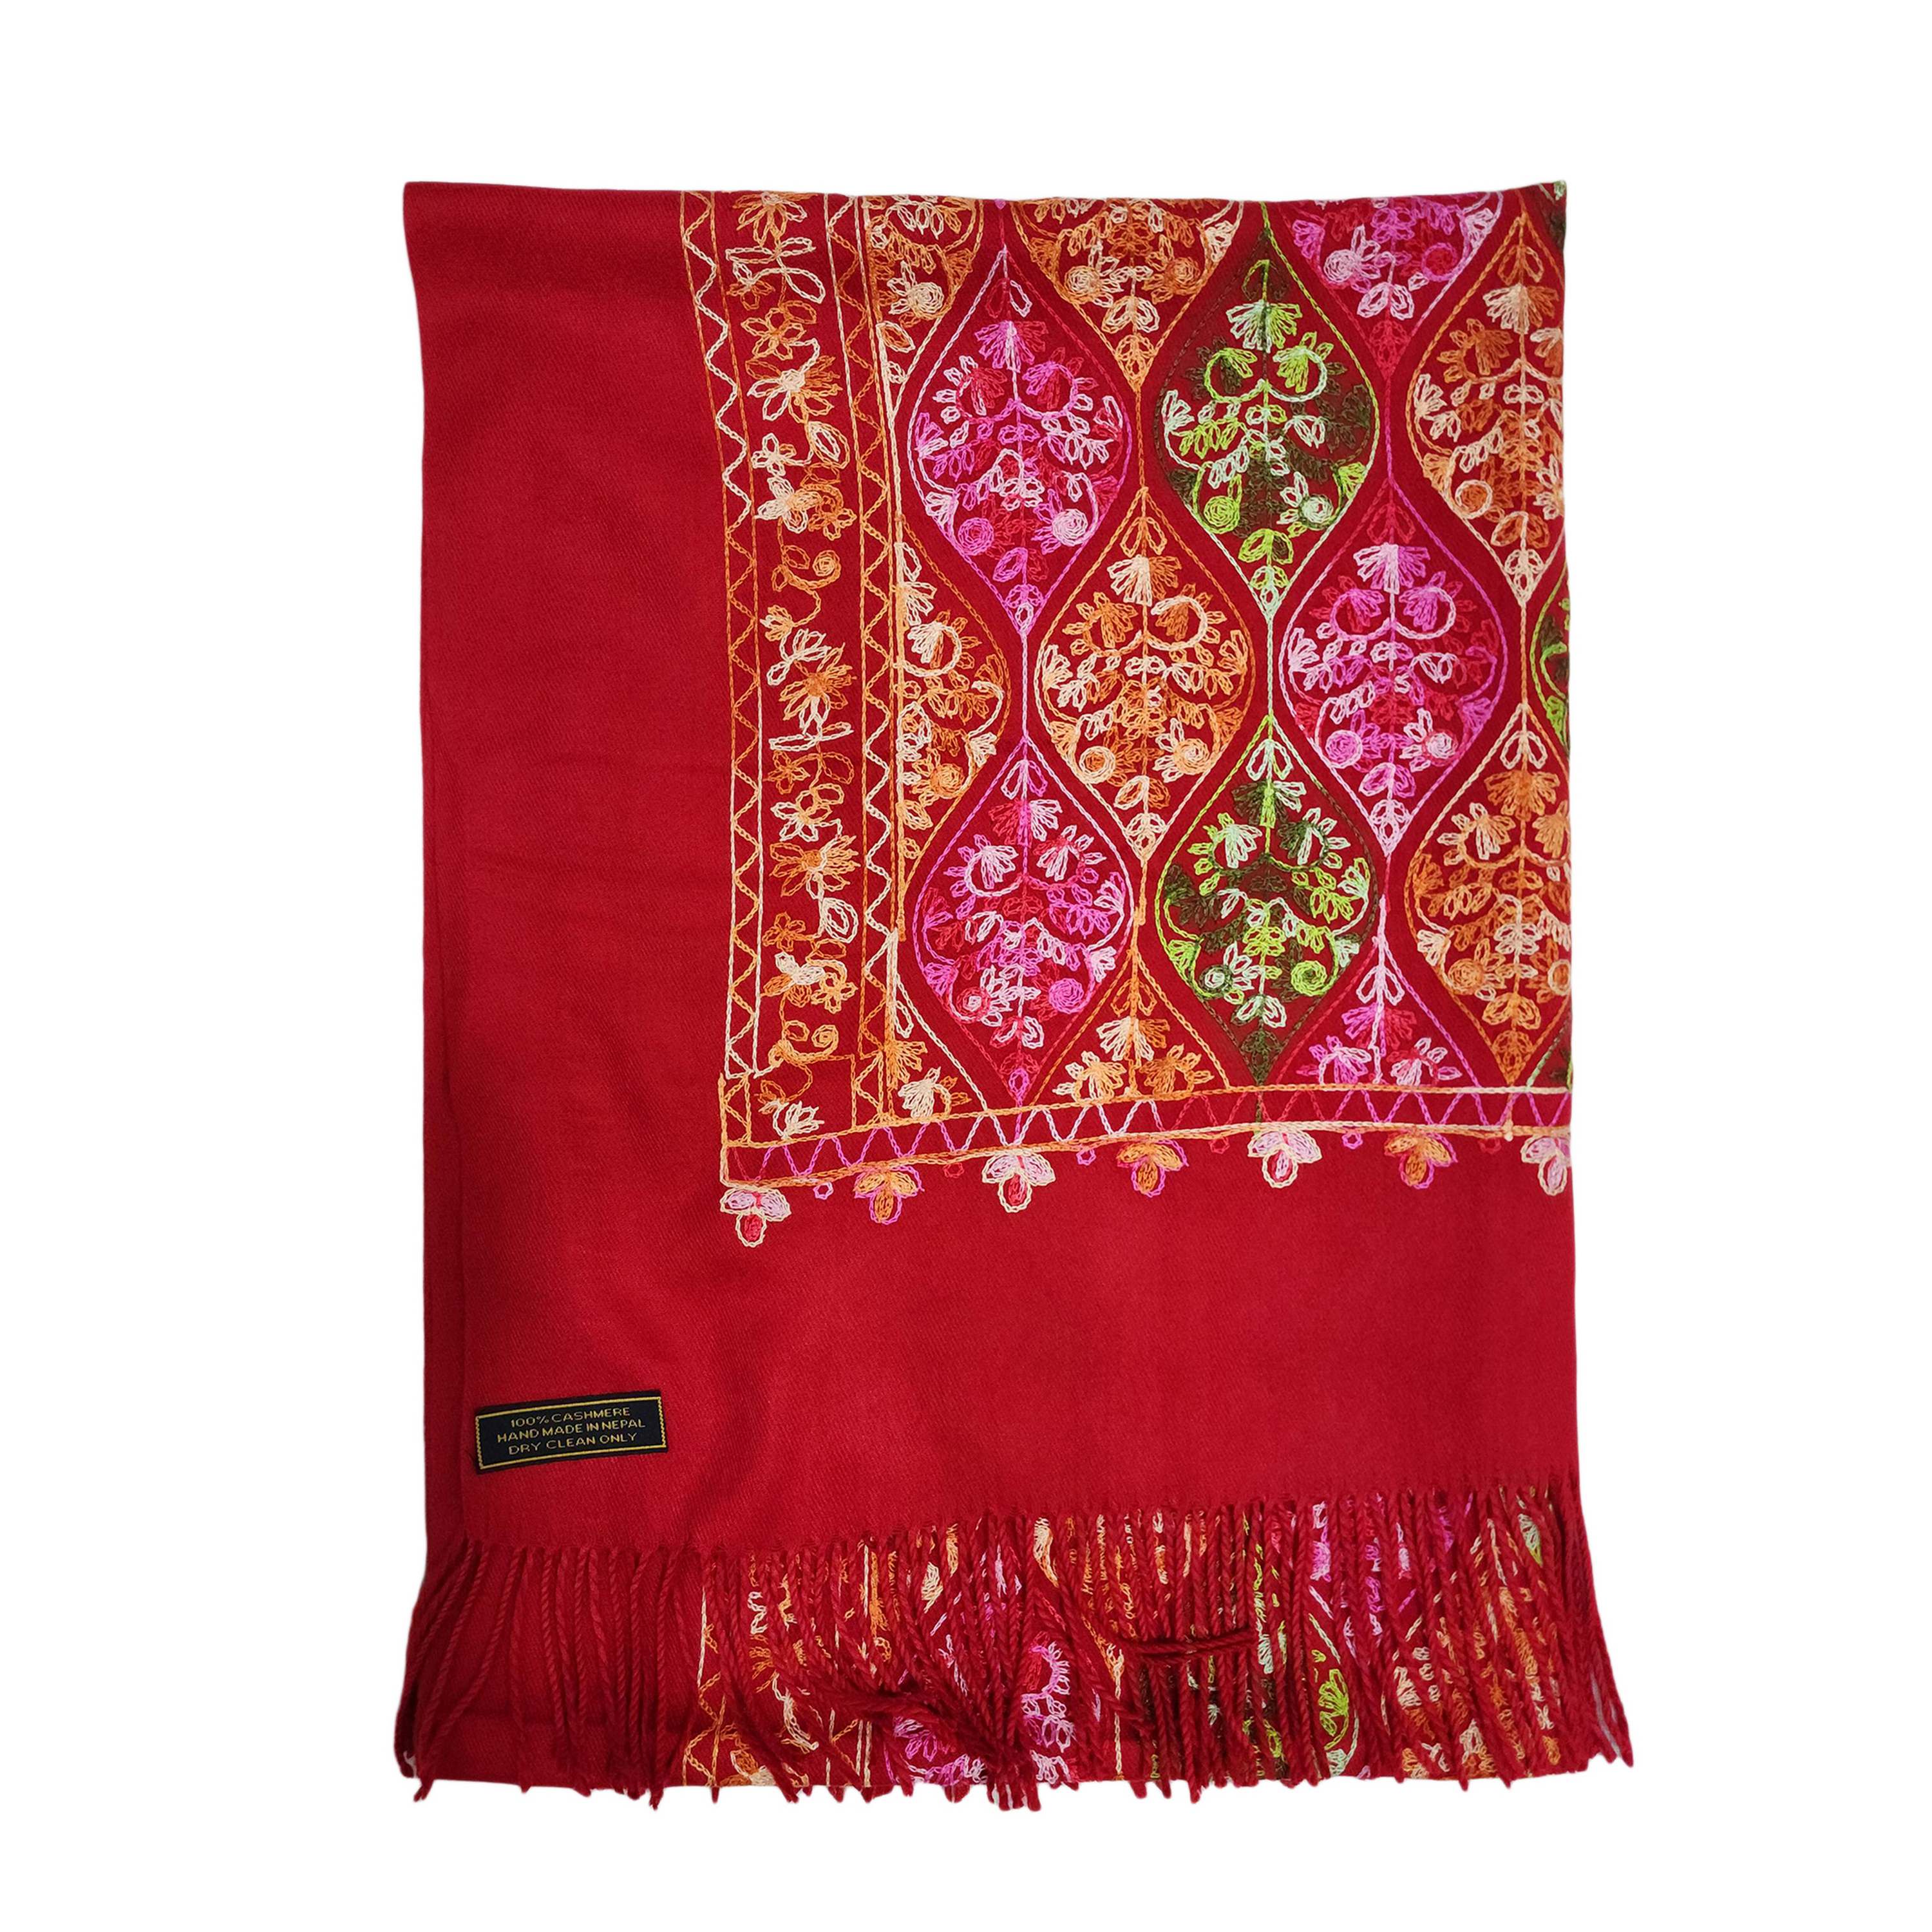 Desigener Shawl, Thick Nepali Shawl, With Heavy Embroidery, Color red